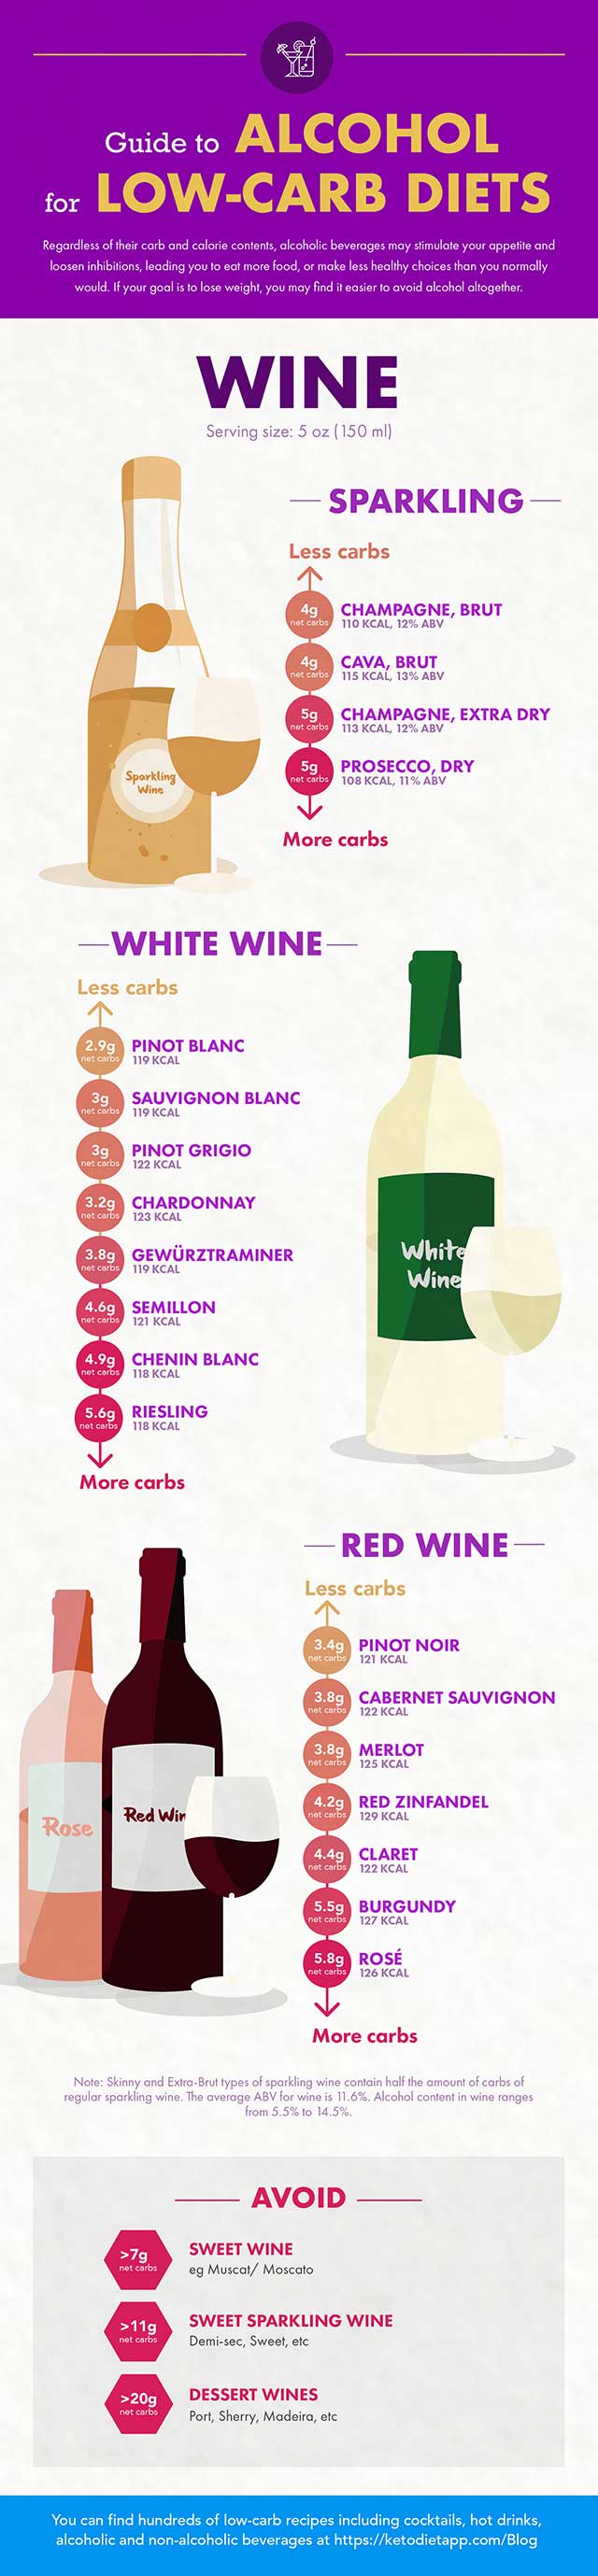 Alcohol Guide - Wine